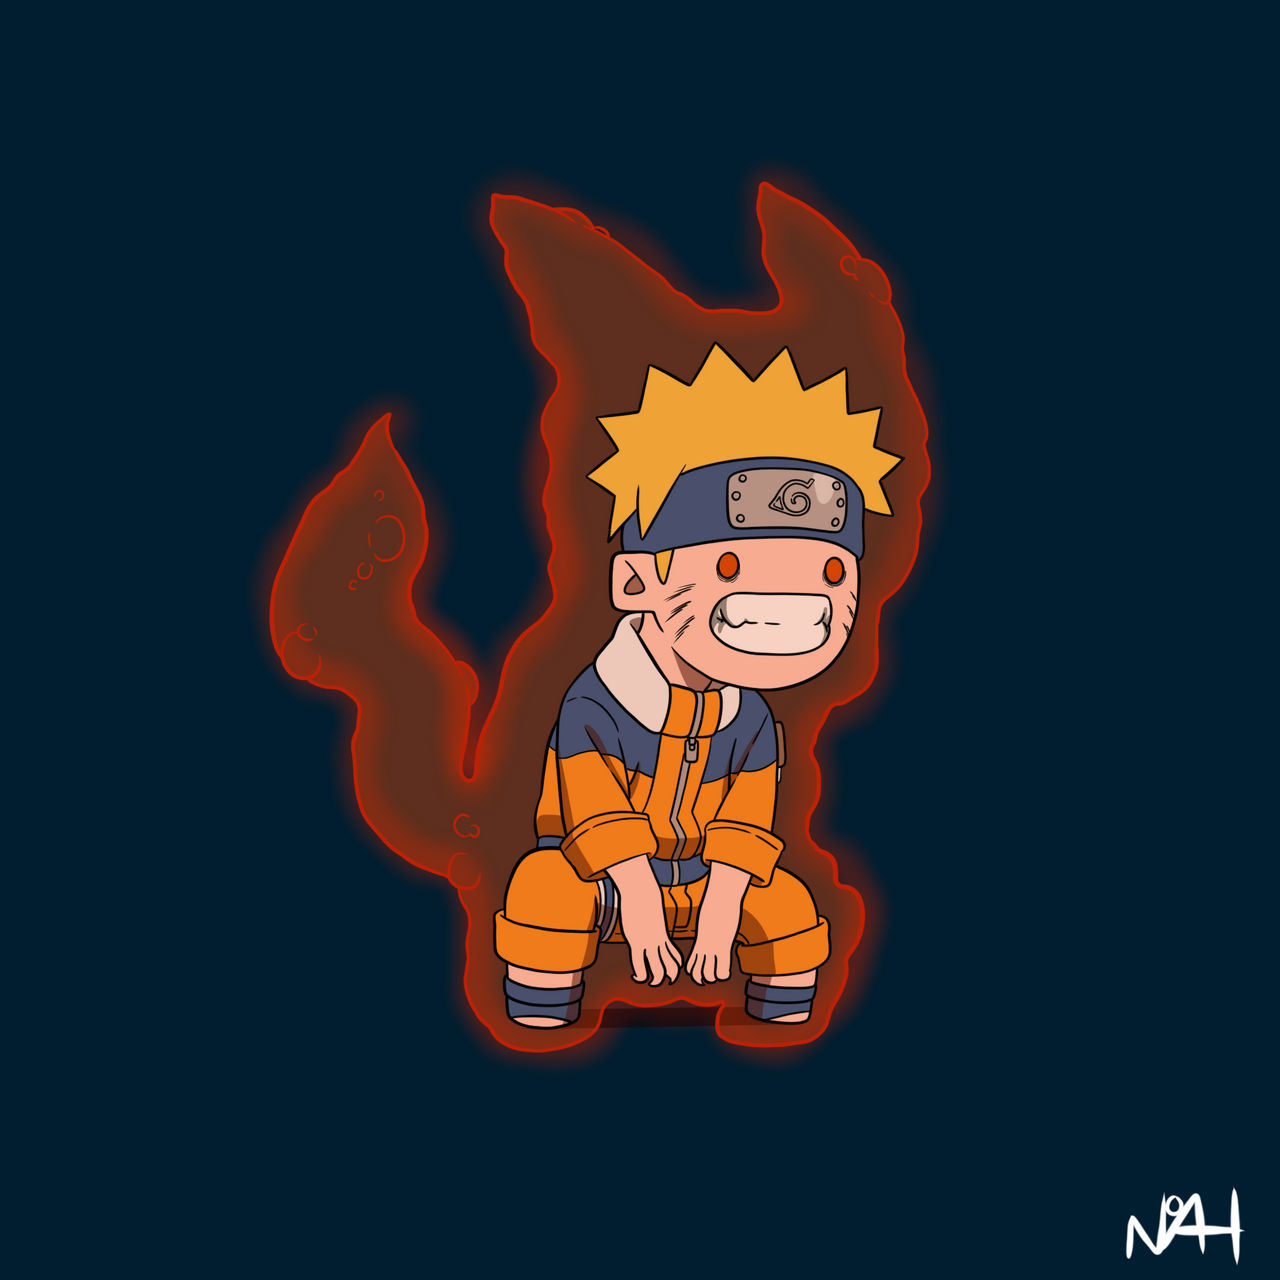 Naruto [ONE TAIL] by TheFutureFoundation on DeviantArt